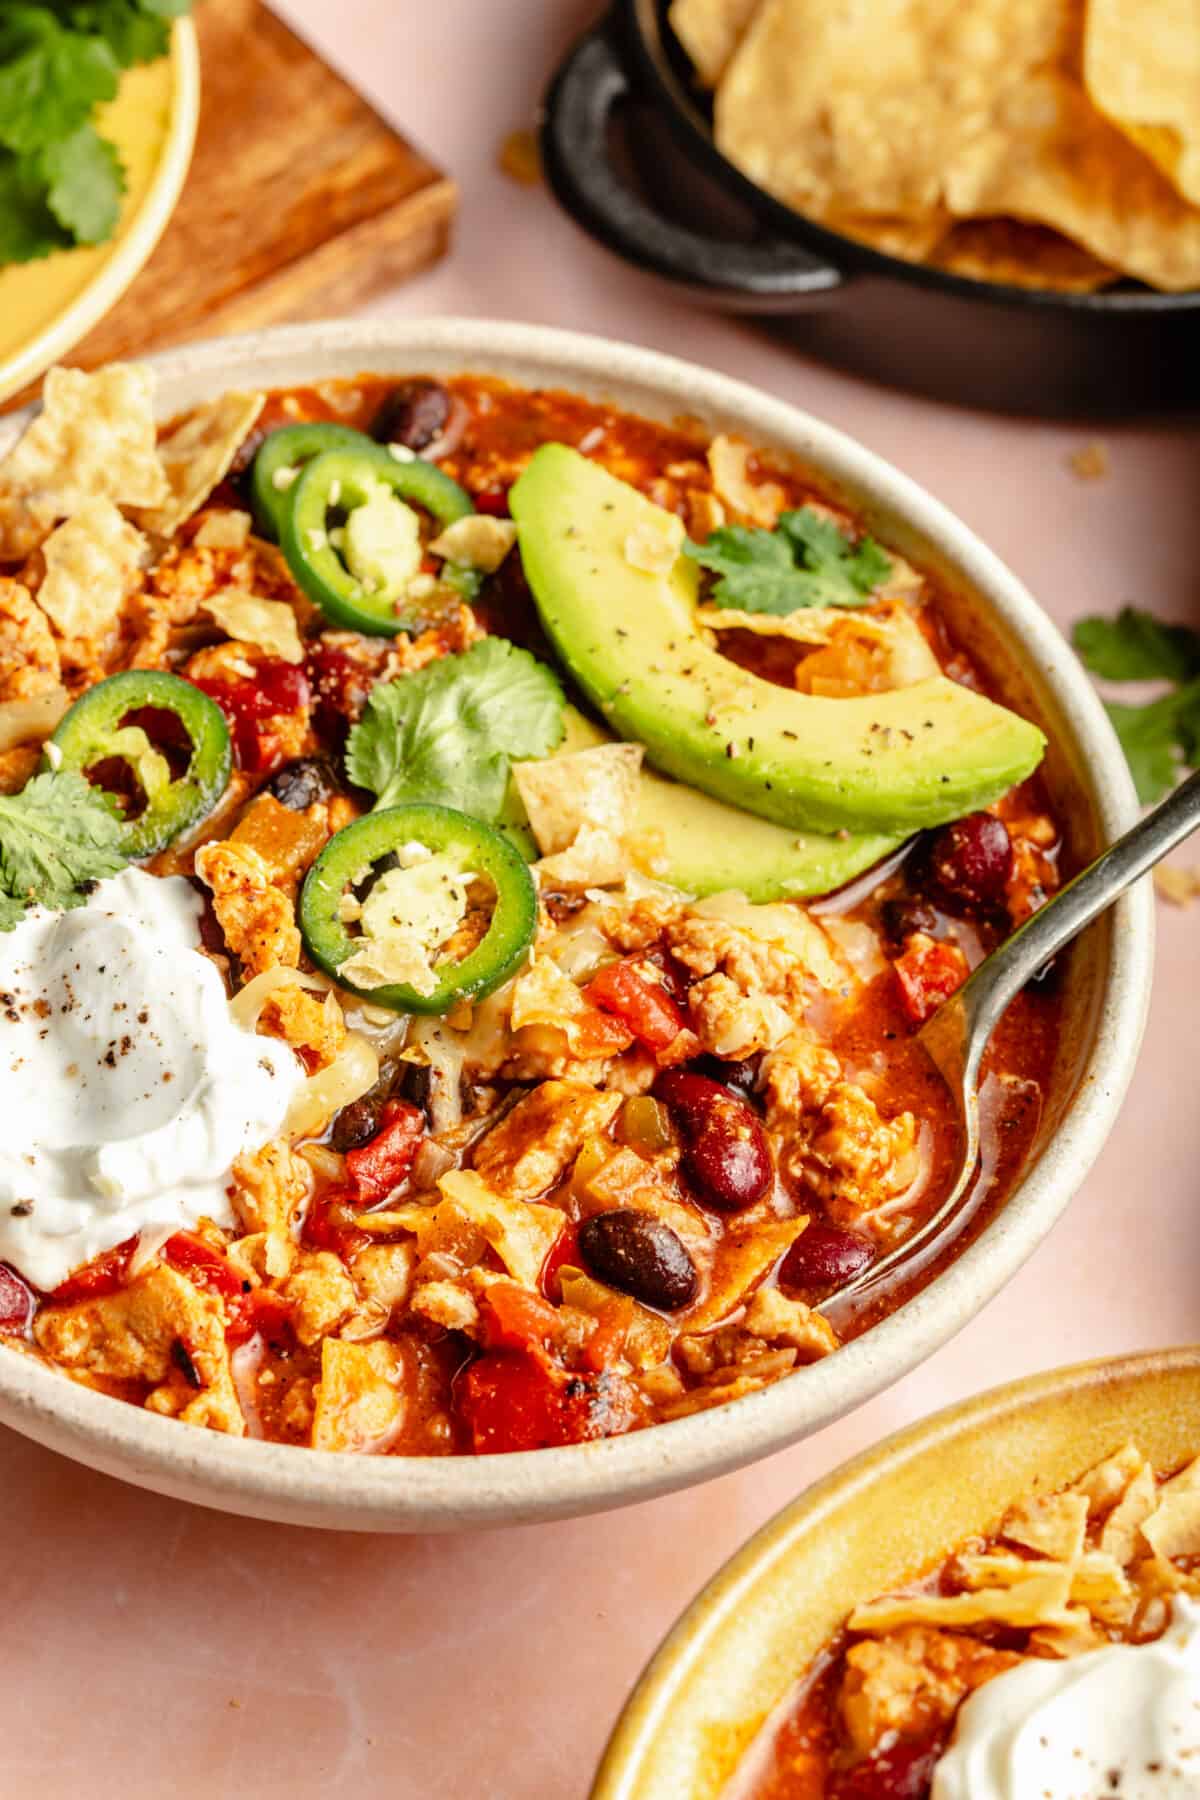 Bowl of Chicken Enchilada Chili garnished with cheese, avocado, sour cream and jalepenos.